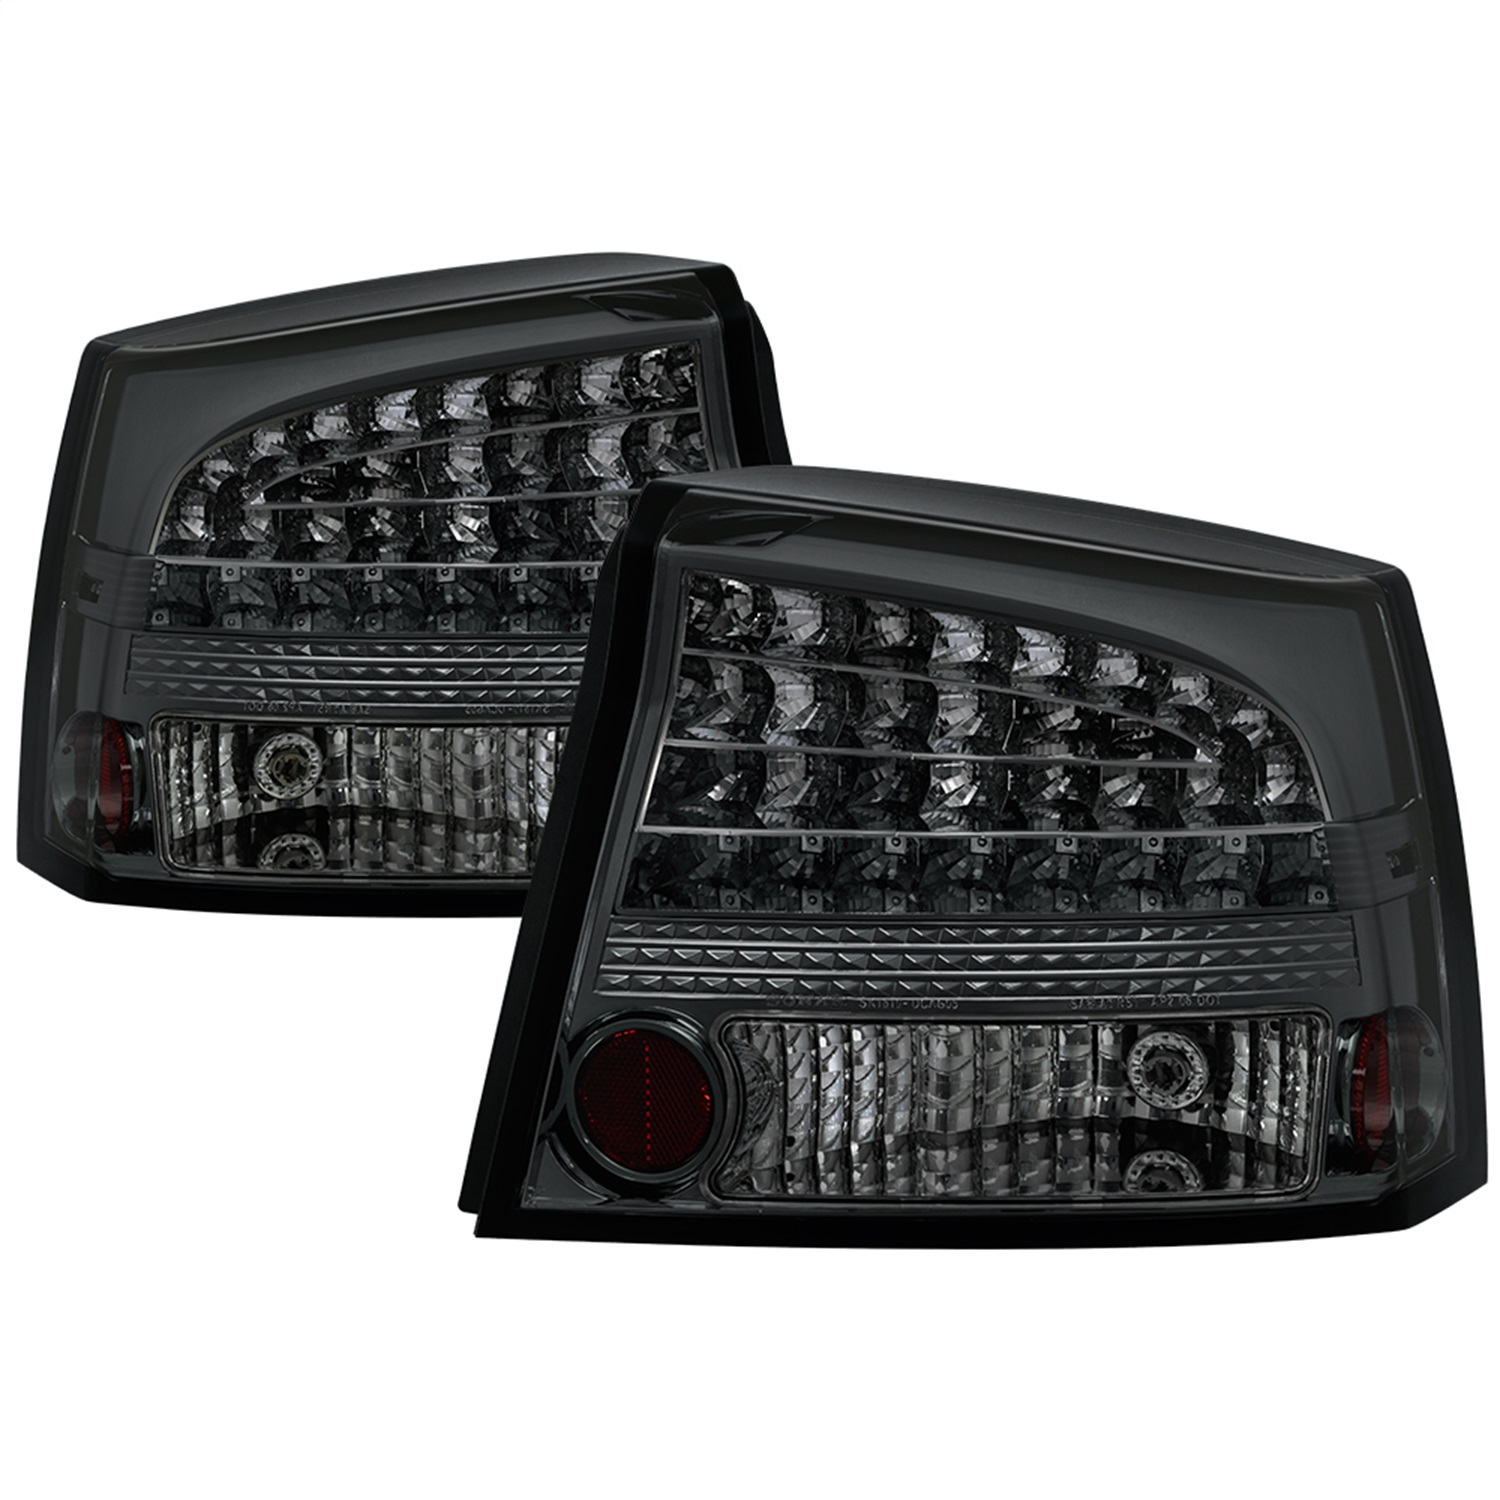 Spyder Auto 5002310 LED Tail Lights Fits 06-08 Charger